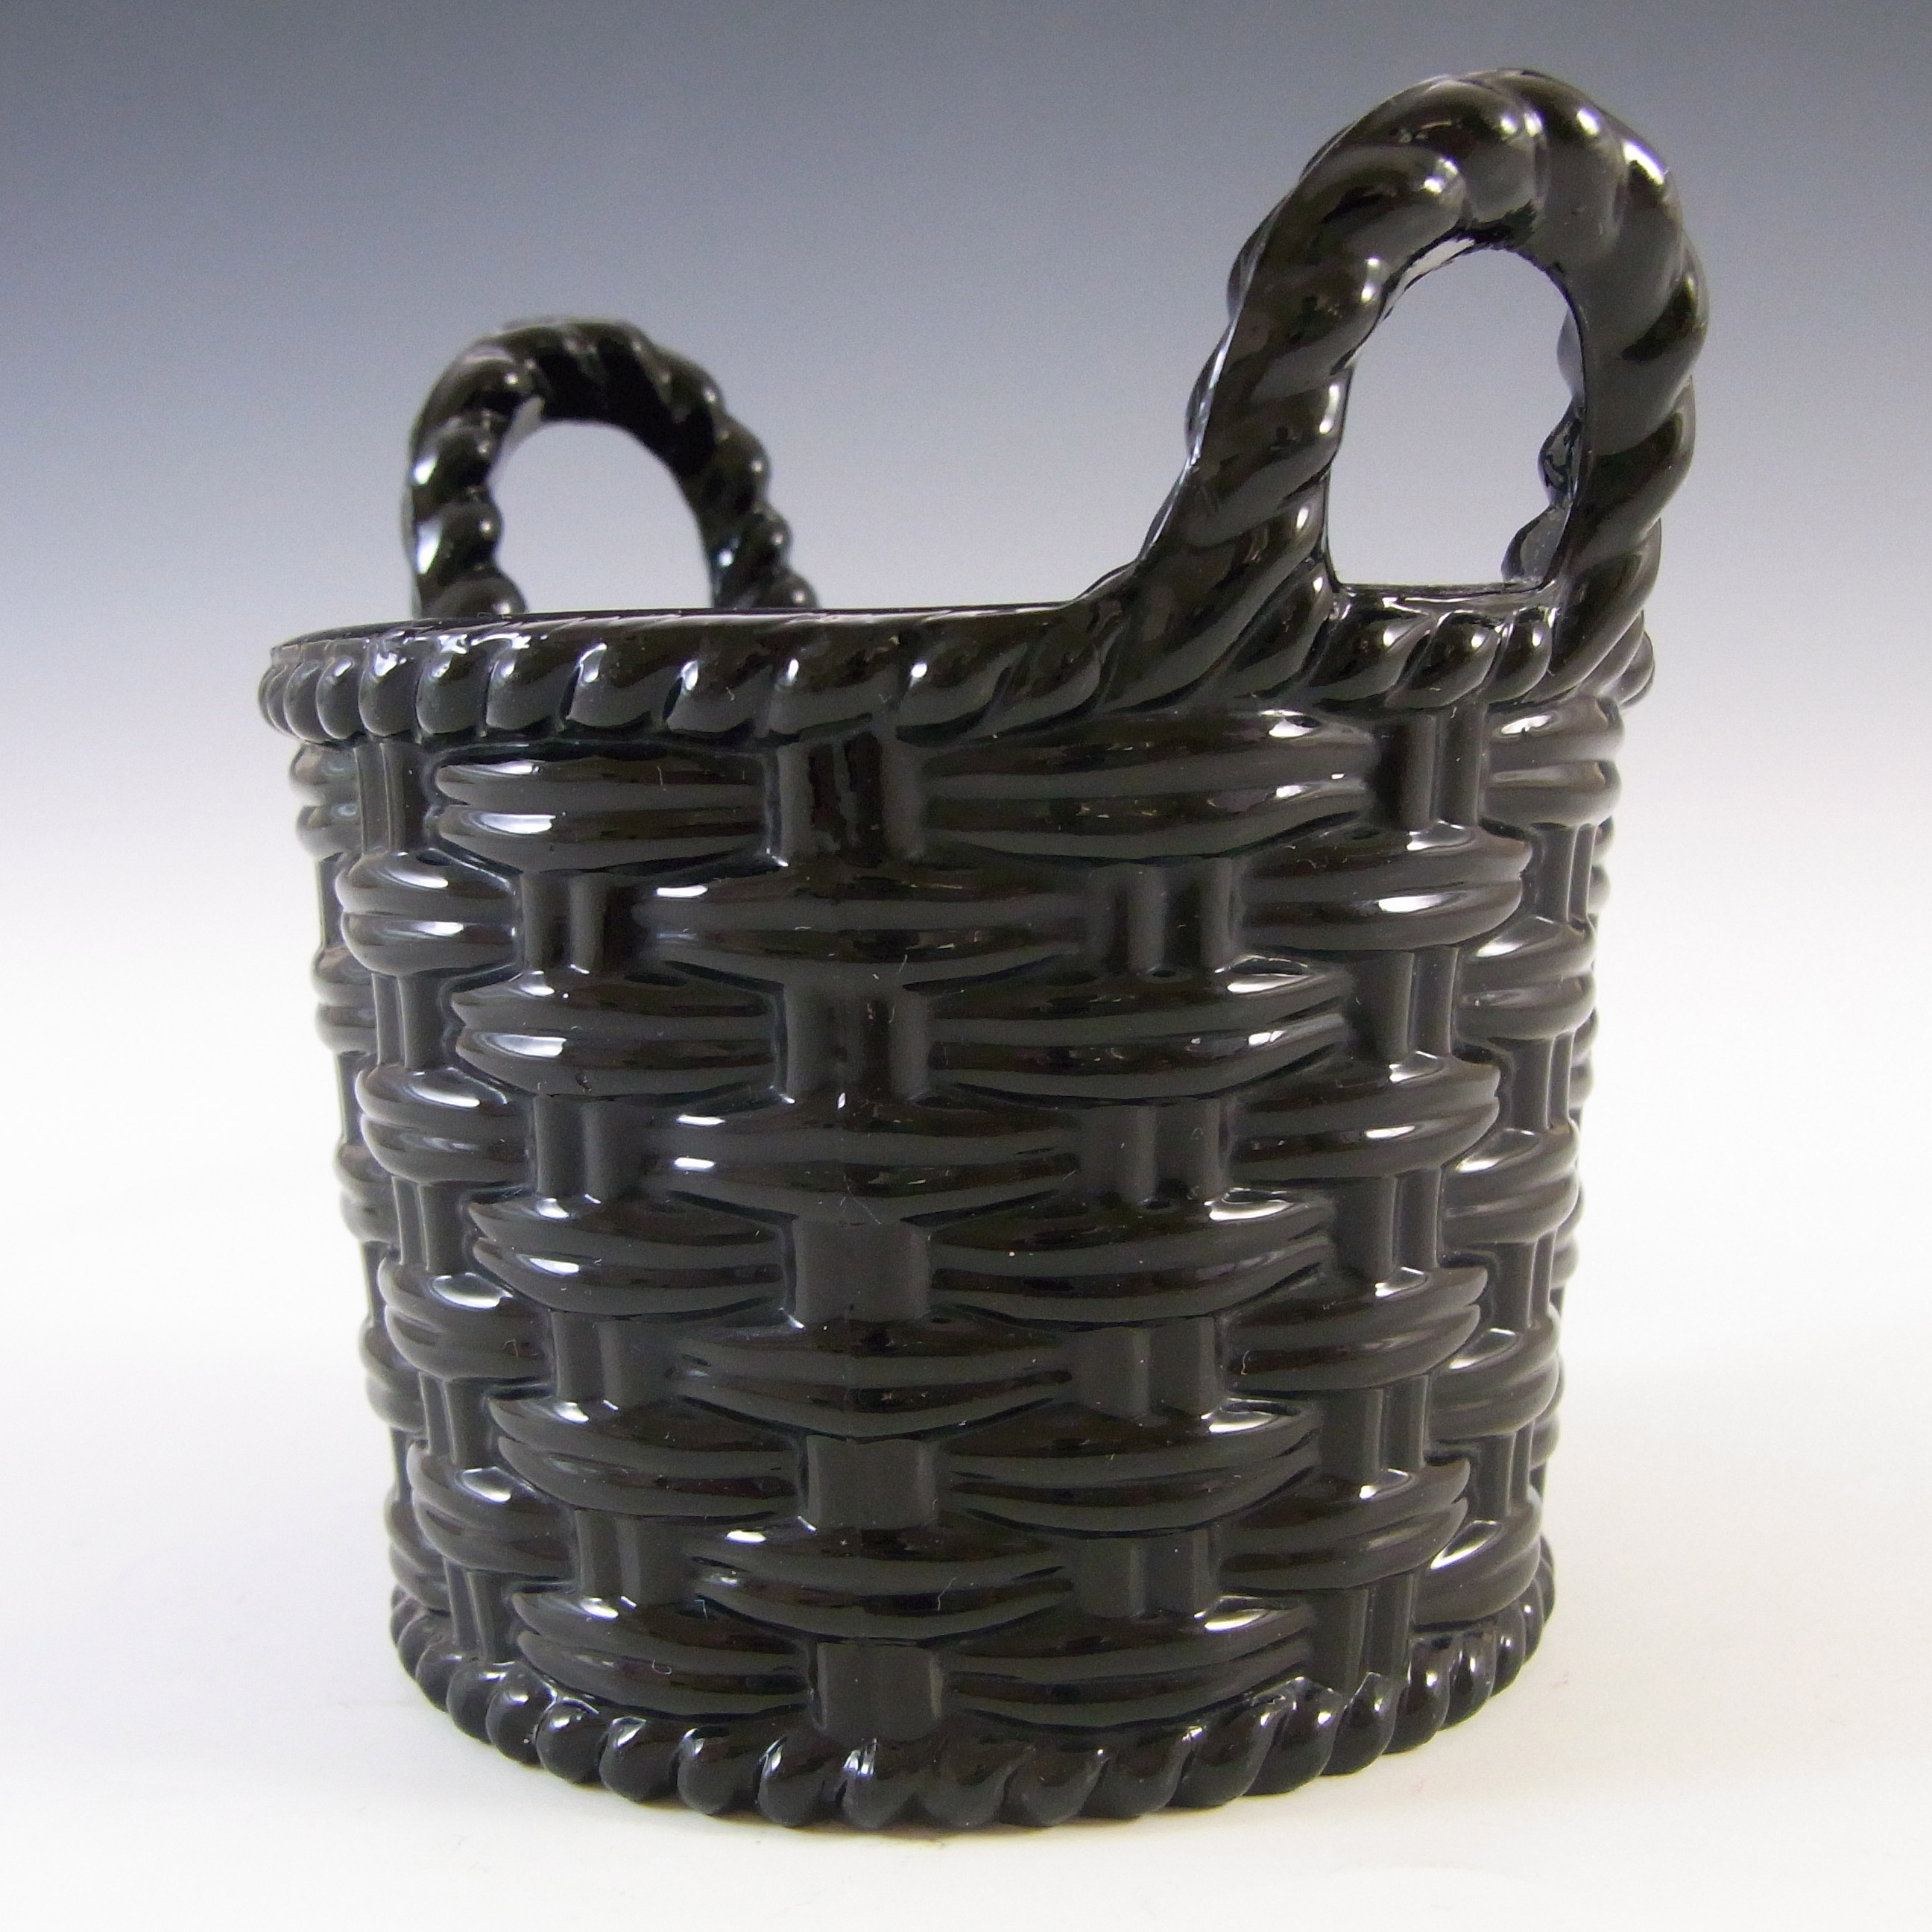 Sowerby #1102 Victorian Black Milk Glass Basket Bowl - Marked - Click Image to Close